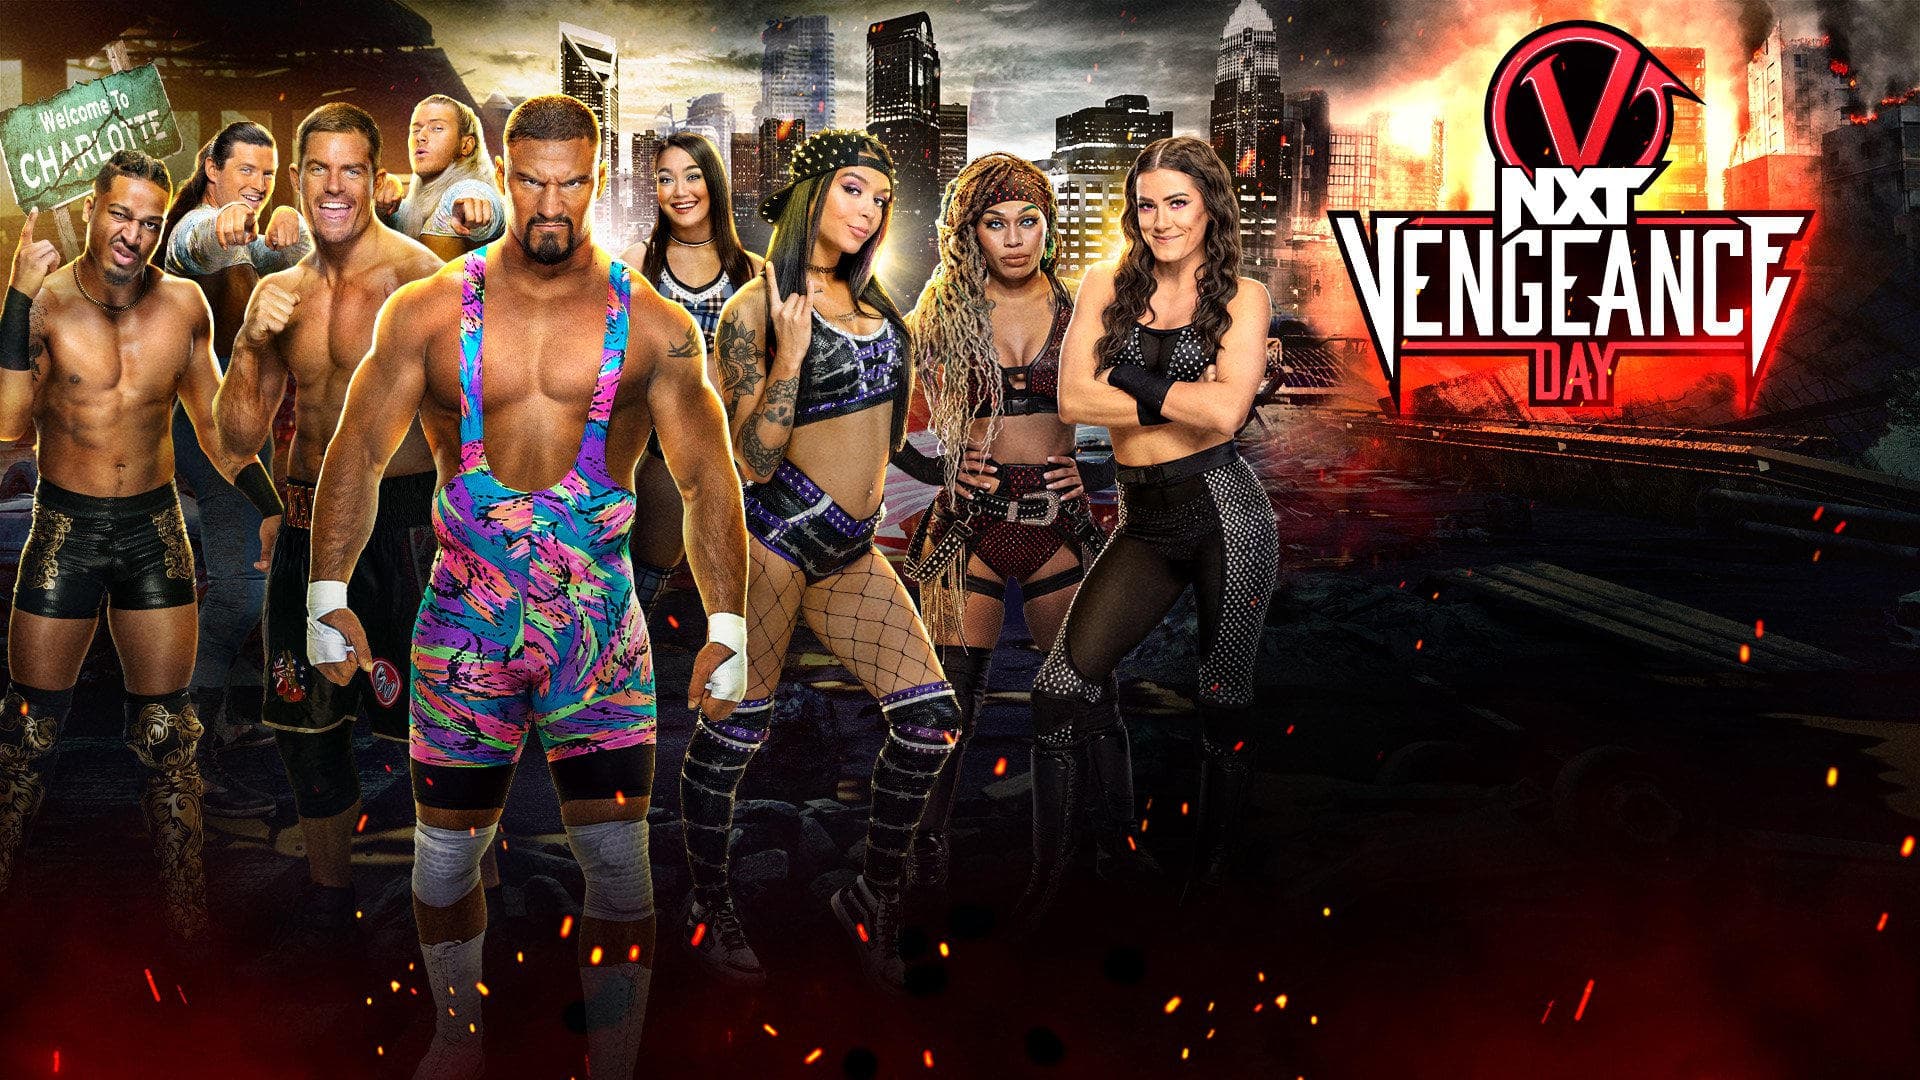 Updated Match Card for WWE NXT Vengeance Day